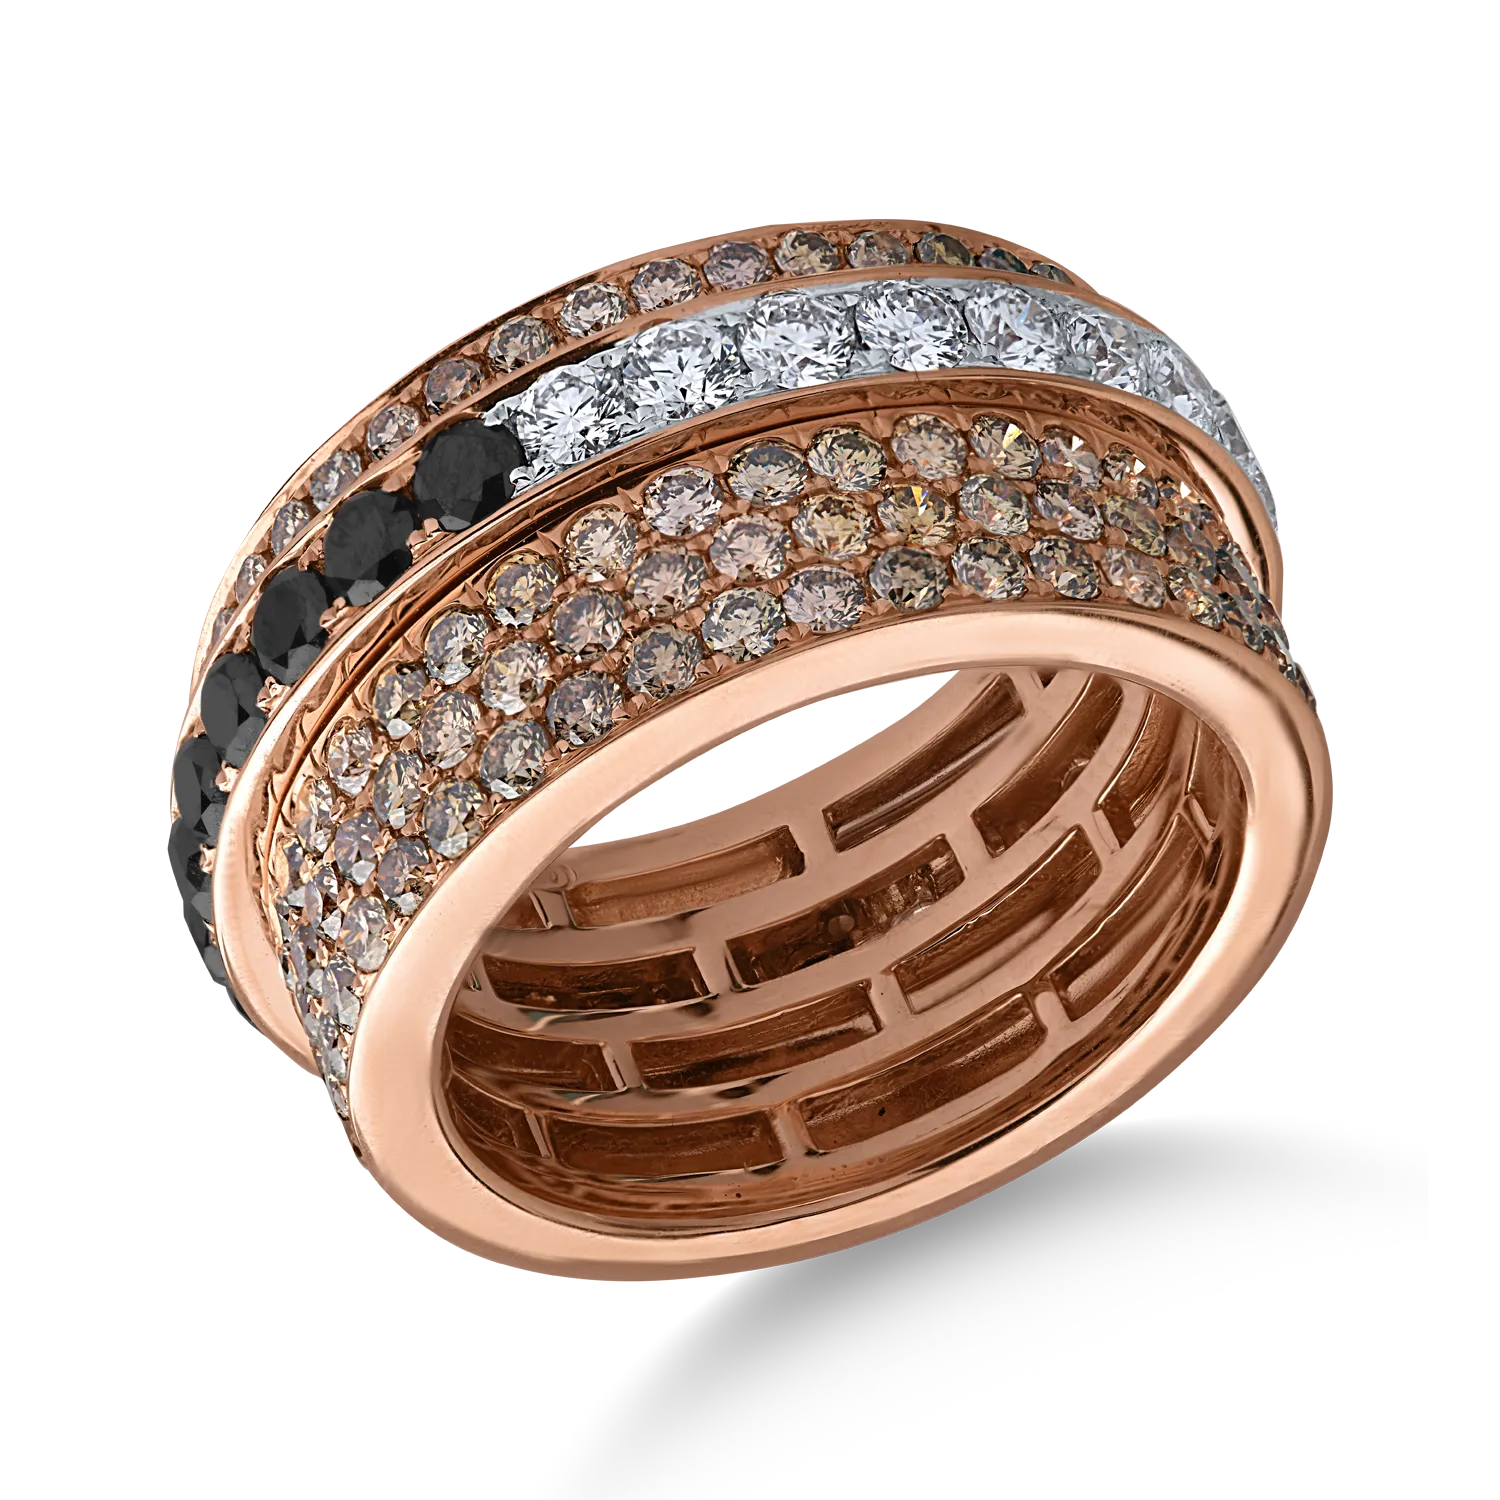 Rose gold ring with 3.18ct diamonds